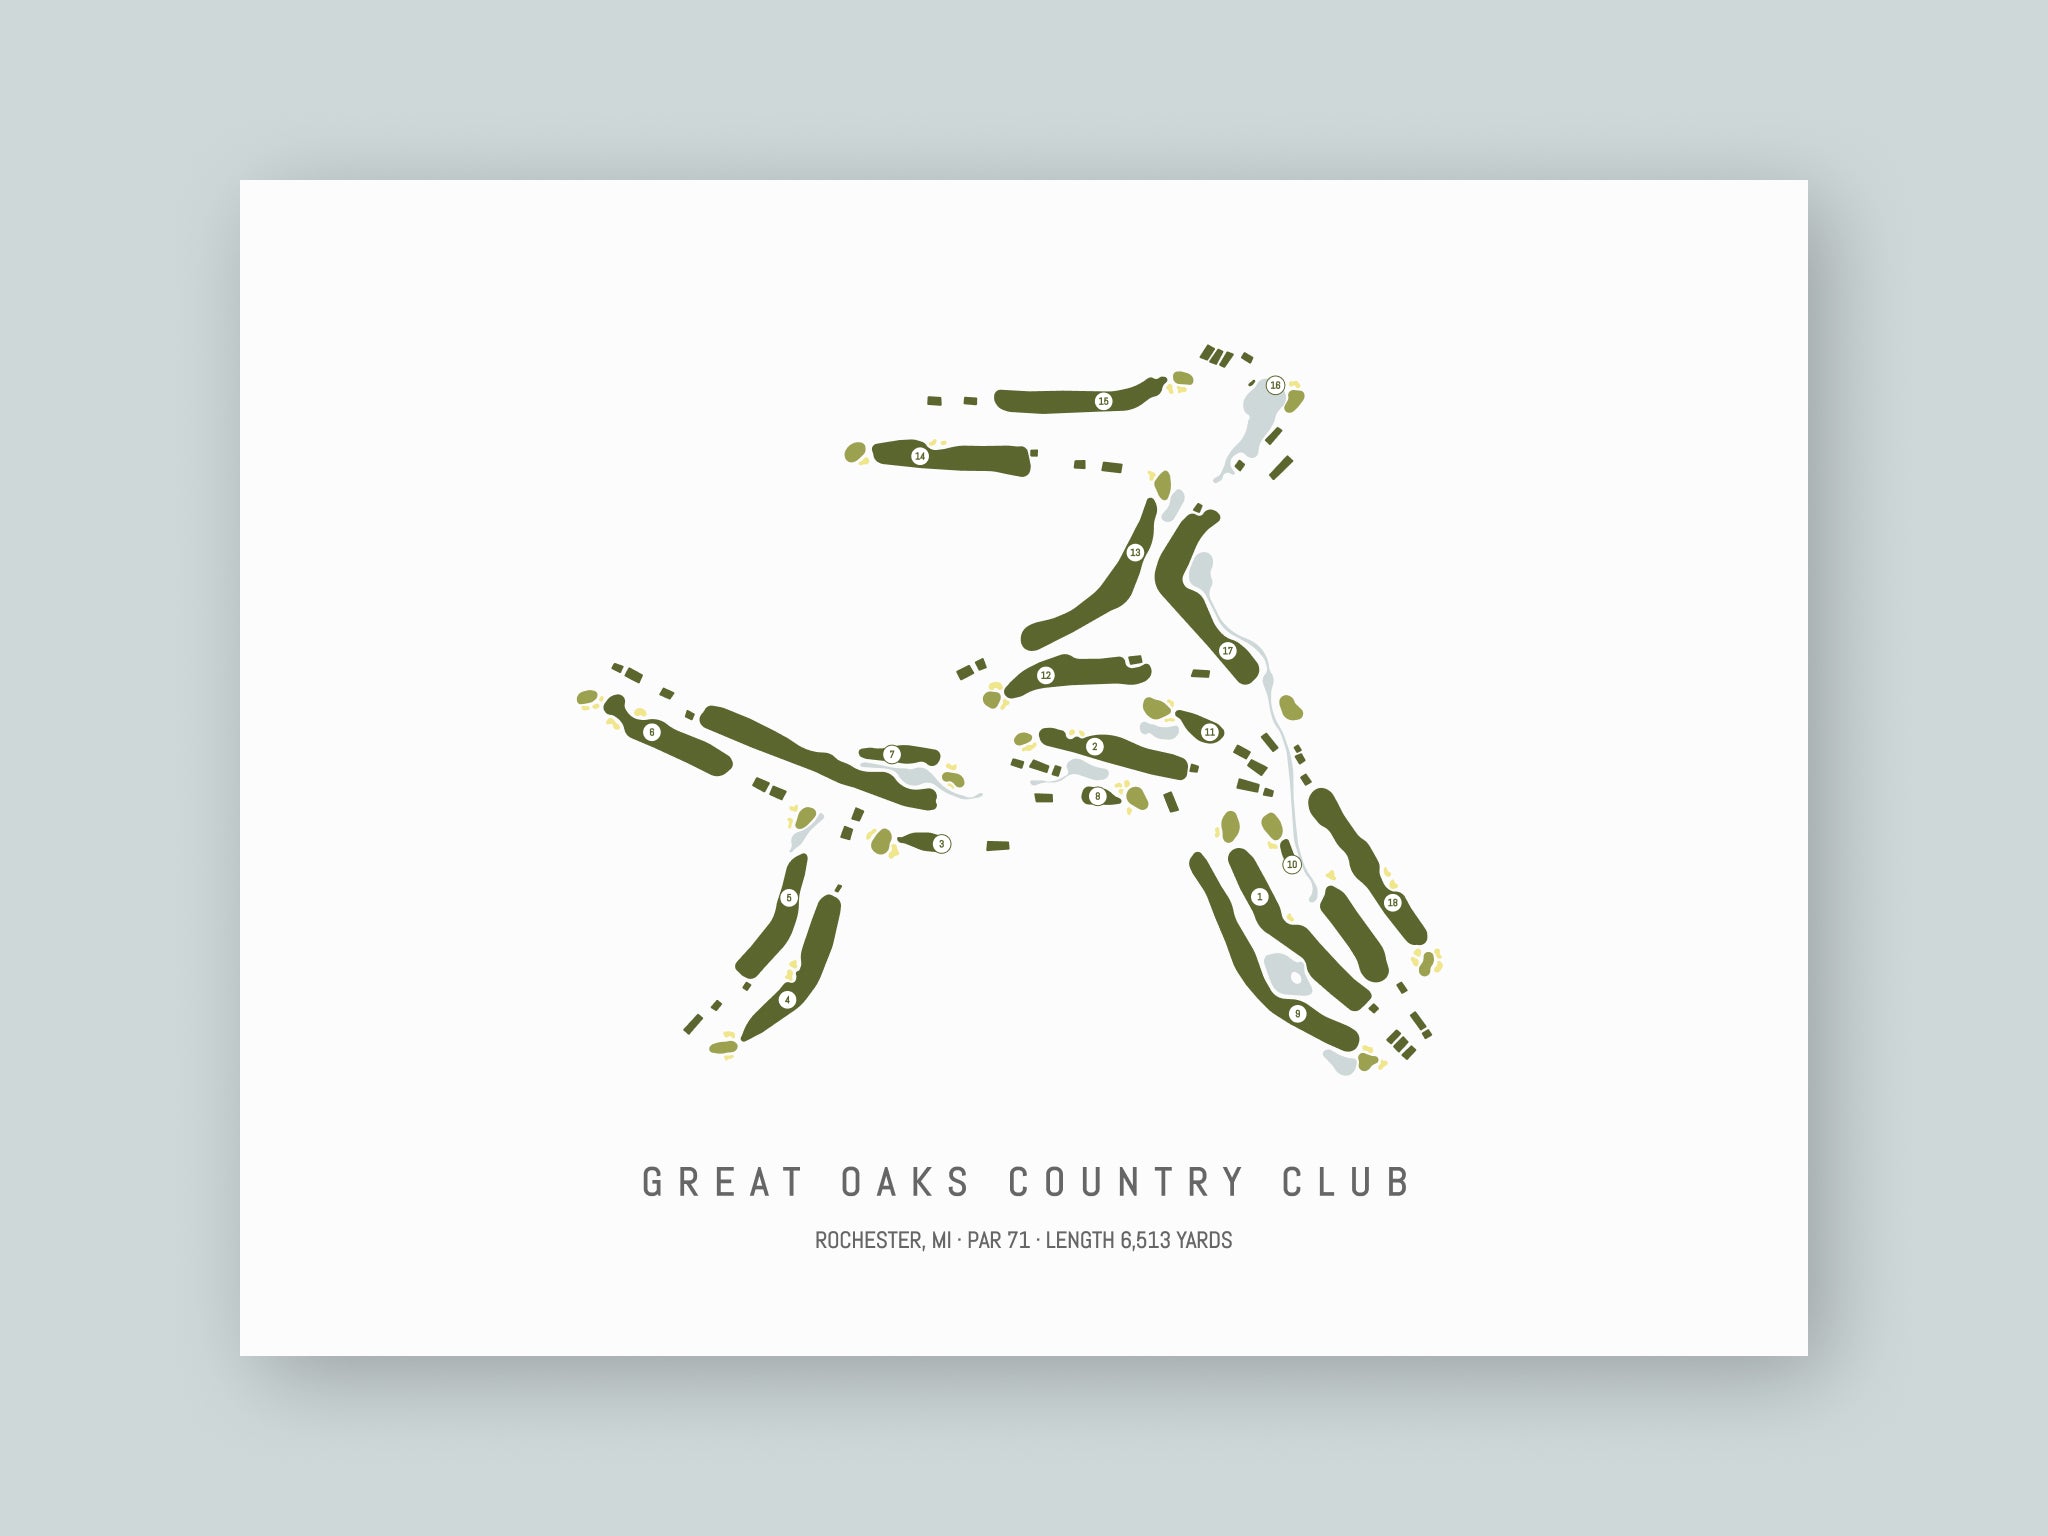 Great-Oaks-Country-Club-MI--Unframed-24x18-With-Hole-Numbers